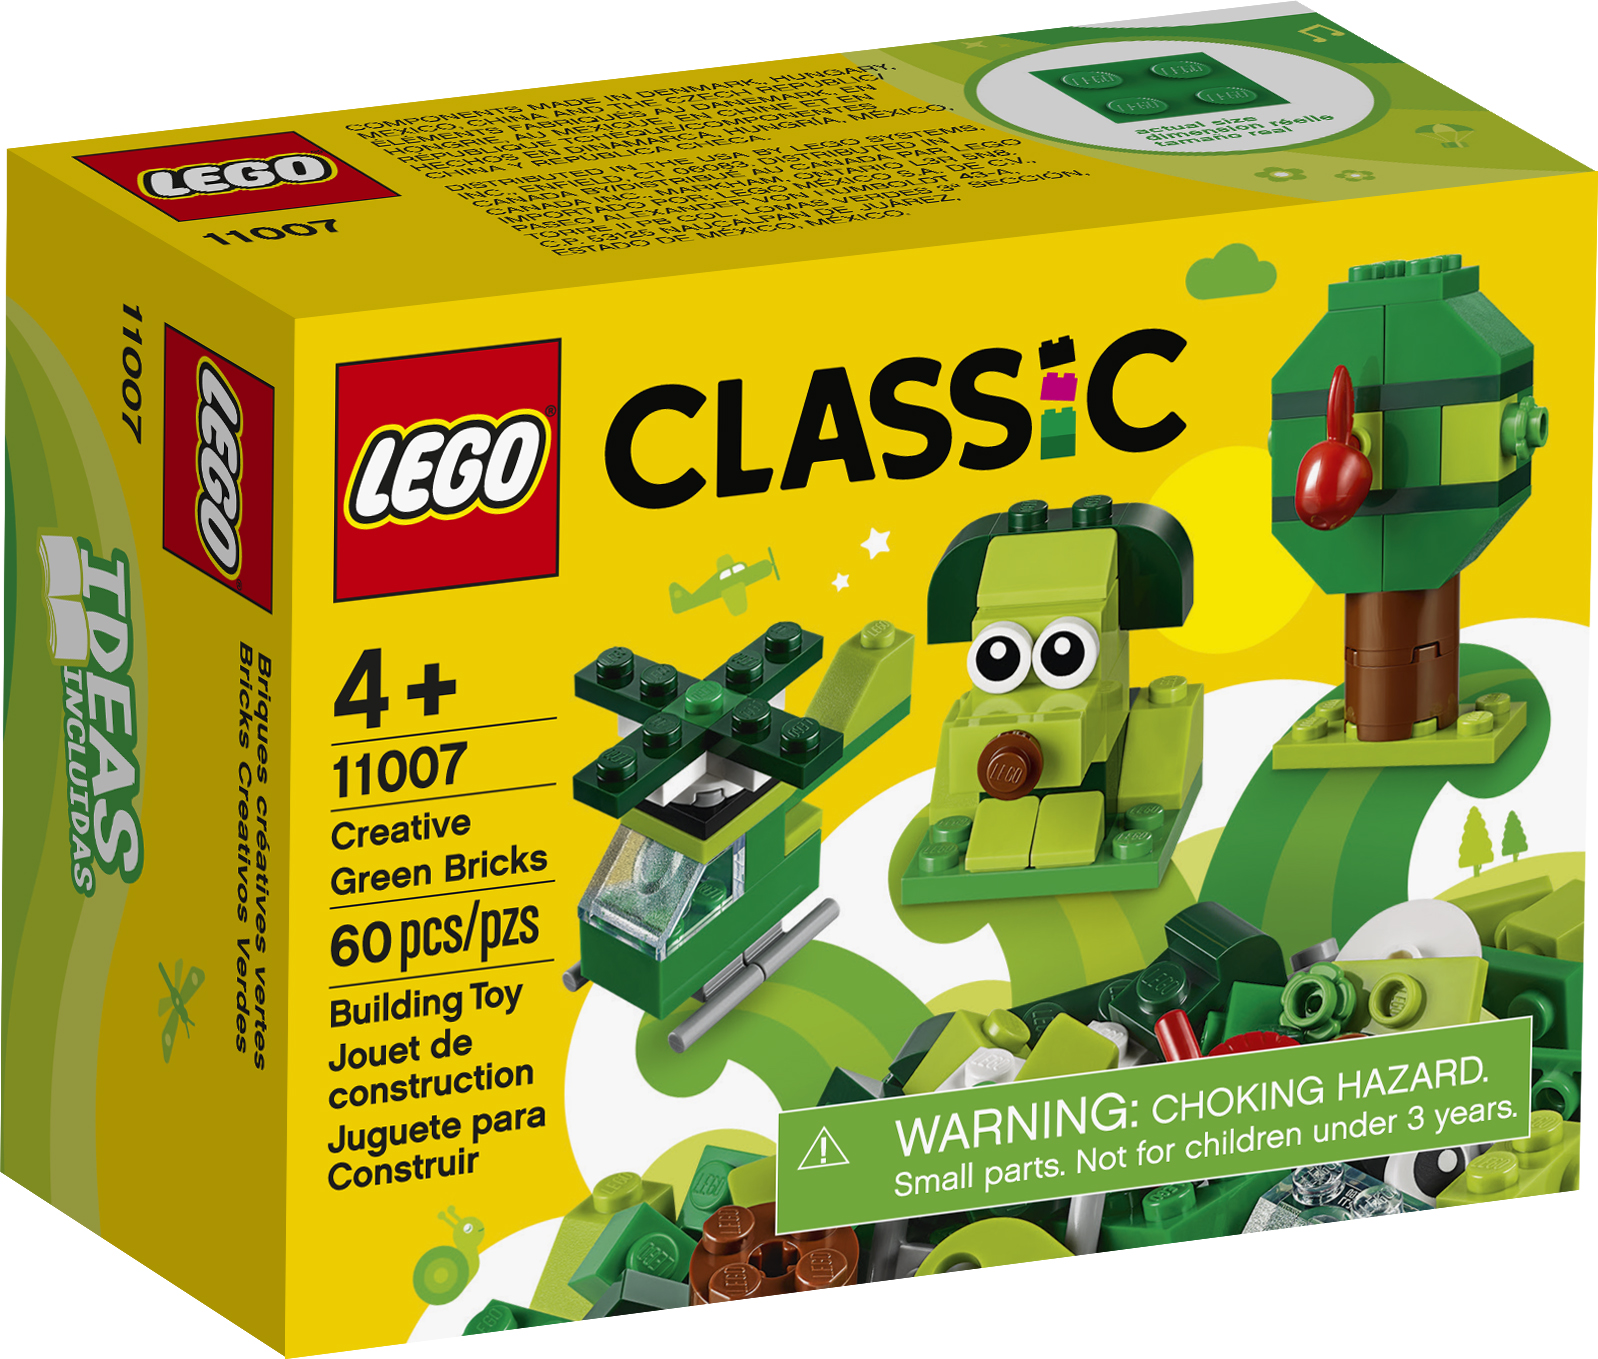 LEGO Classic Creative Green Bricks 11007 Building Kit to Inspire Imaginative Play (60 Pieces) - image 5 of 7